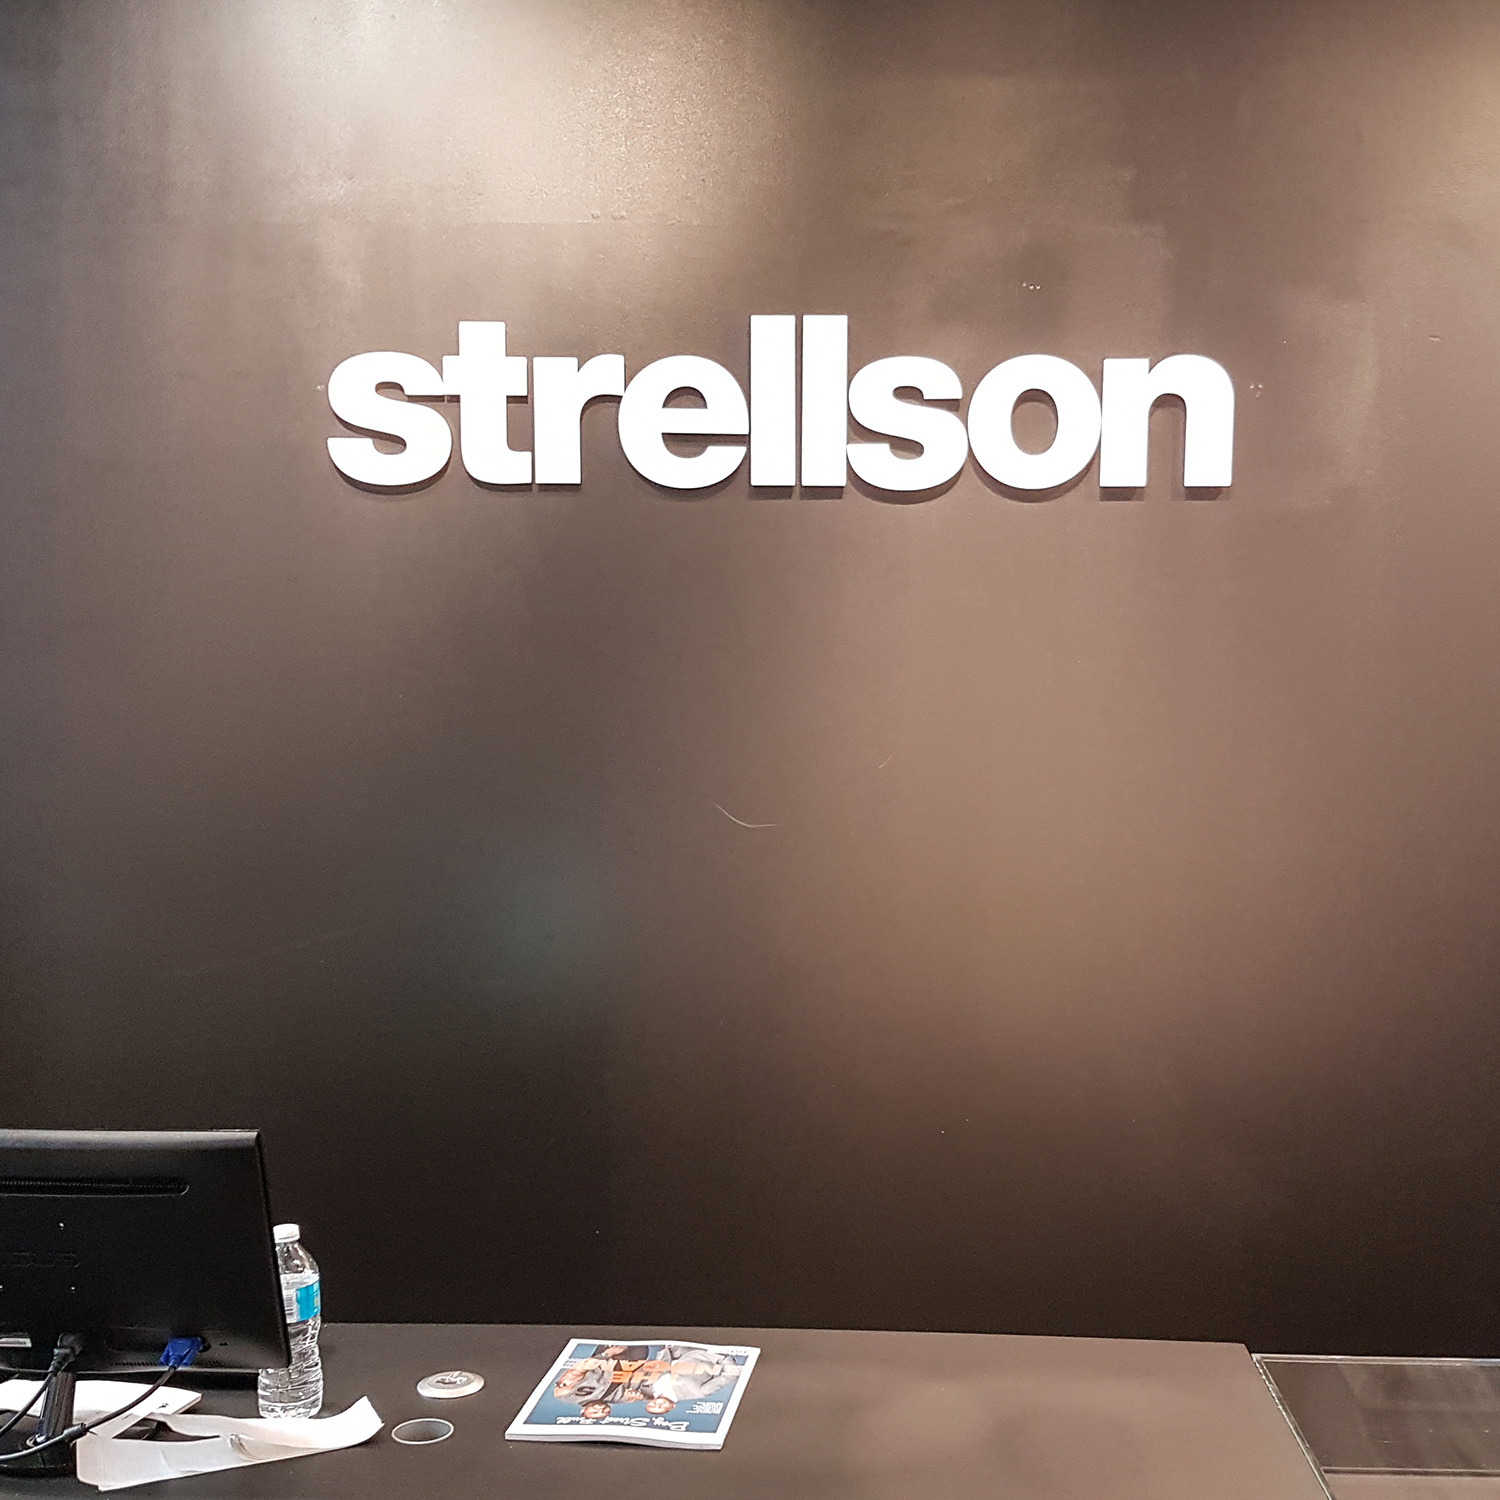 Strellson White Acrylic Letters for Wall in Vaughan, ON